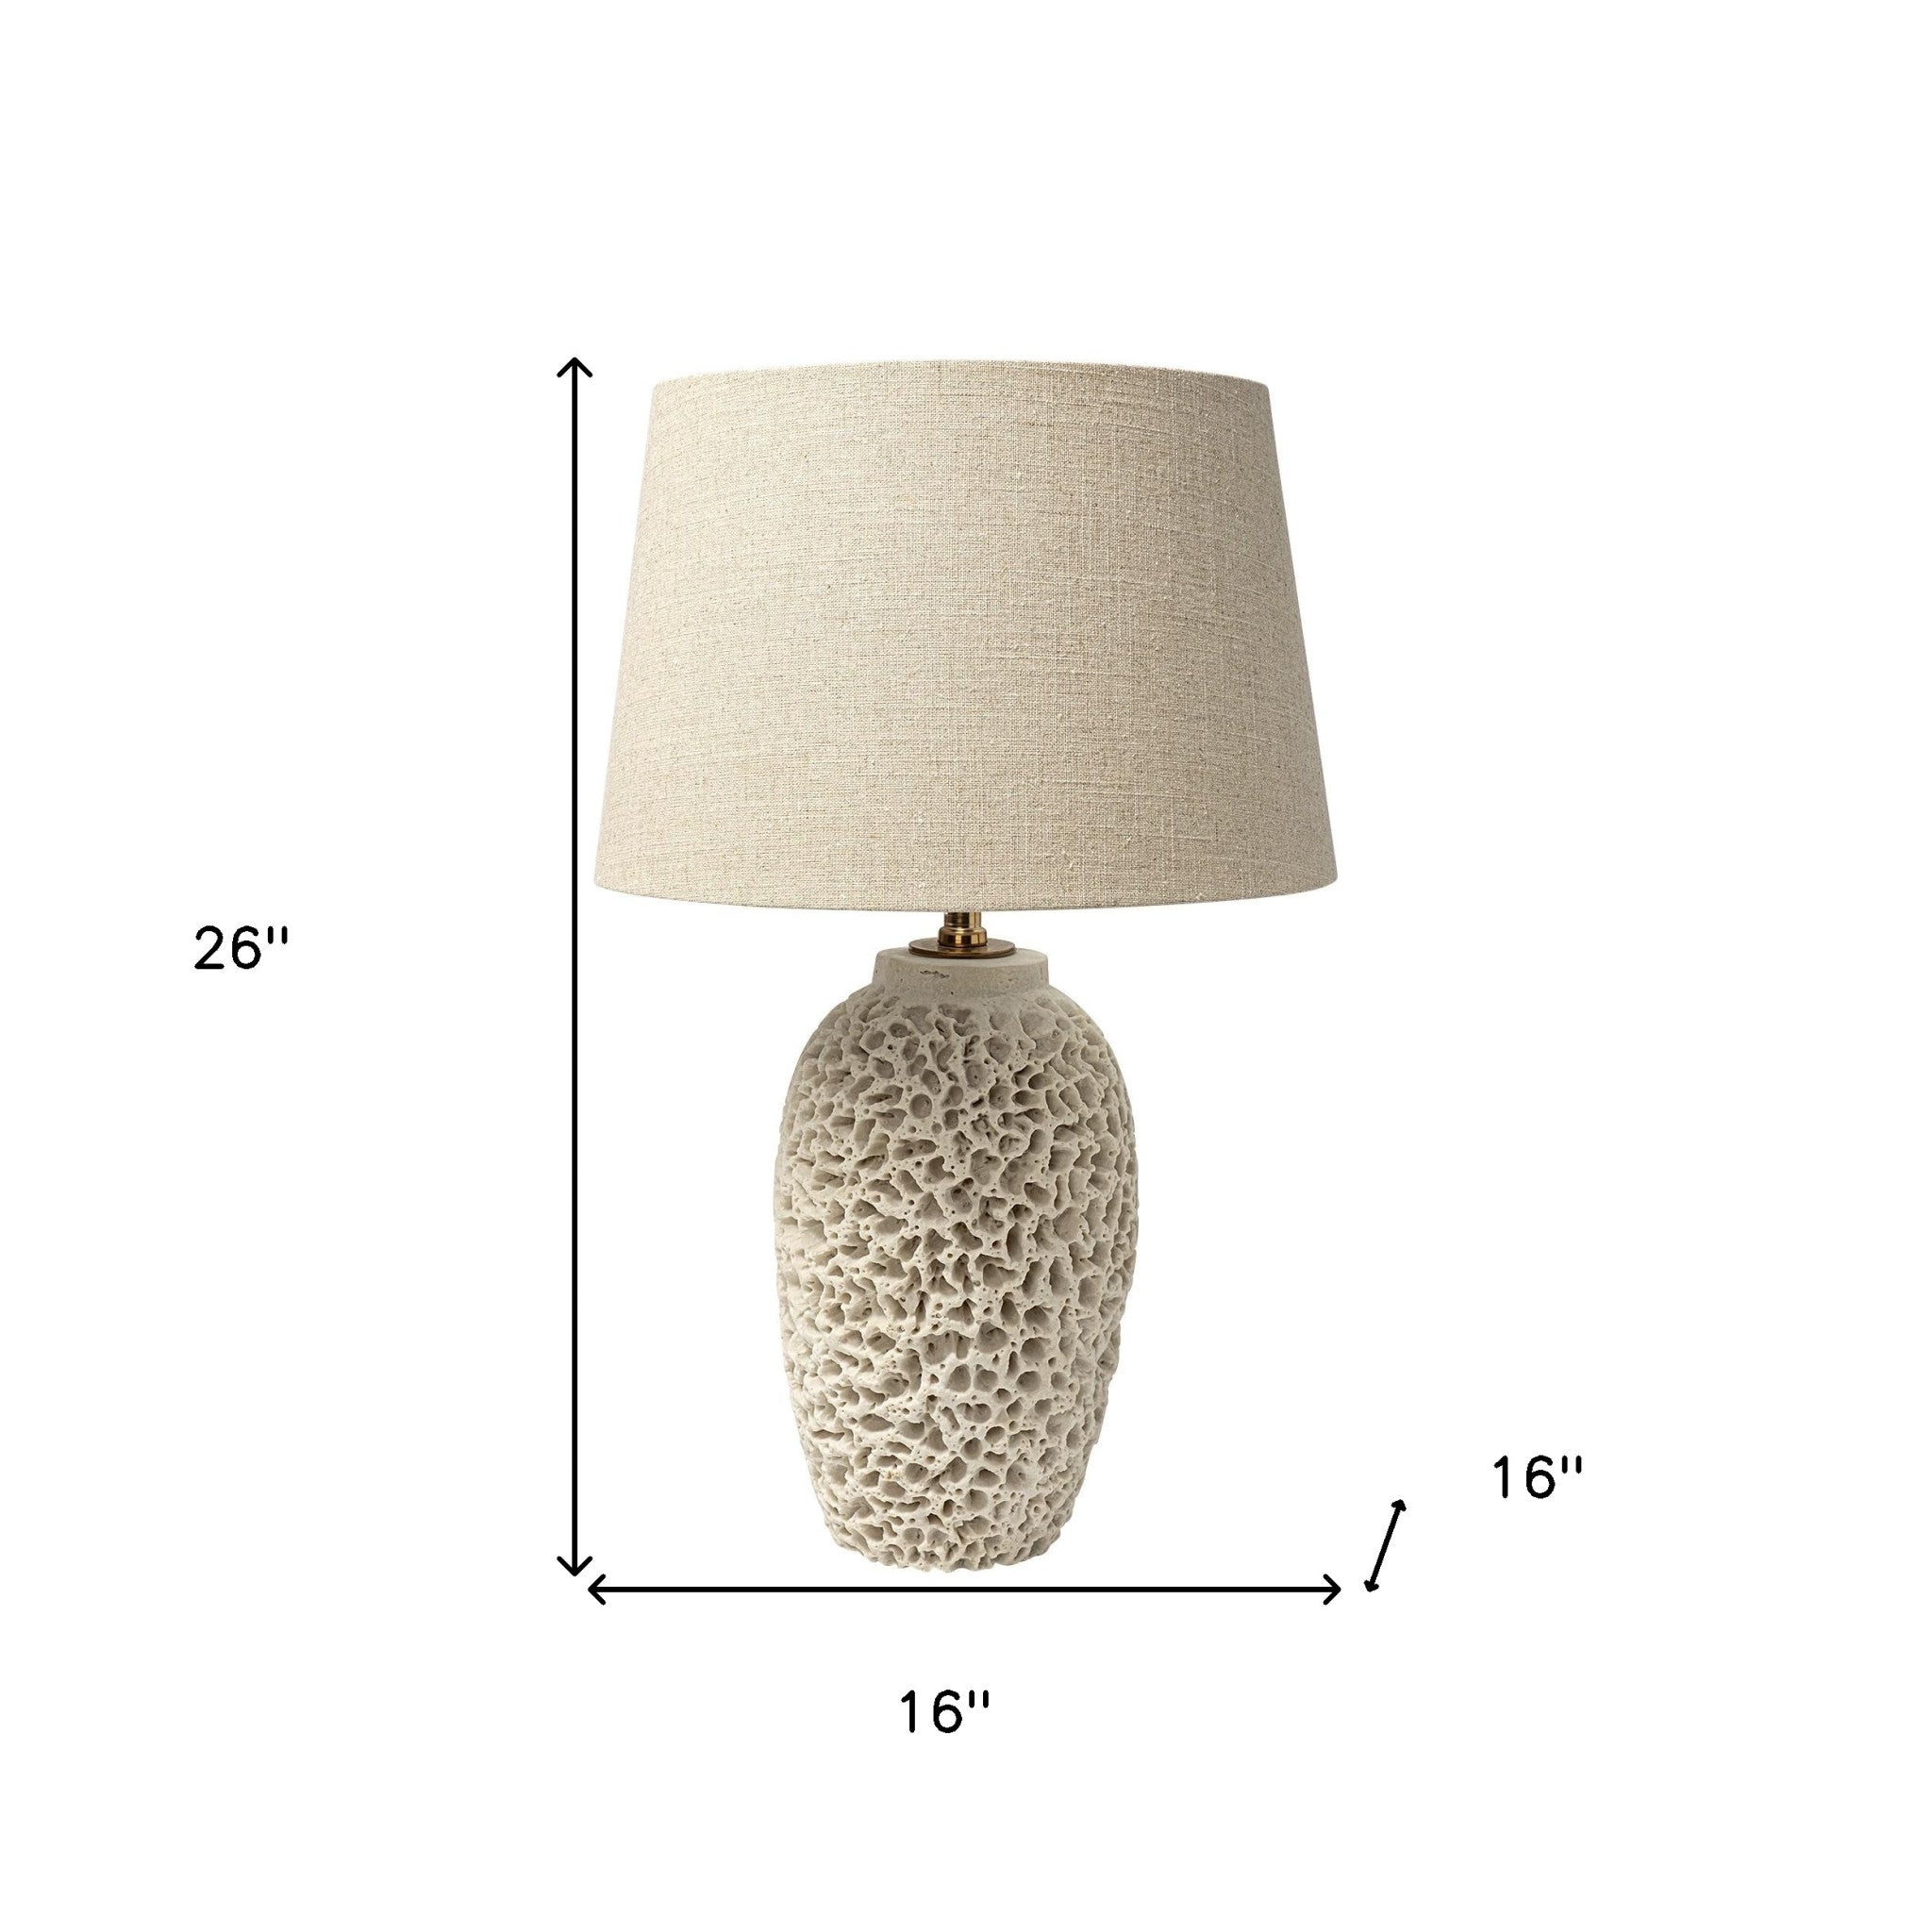 26" Beige Lamp Base LED With Champagne Shade